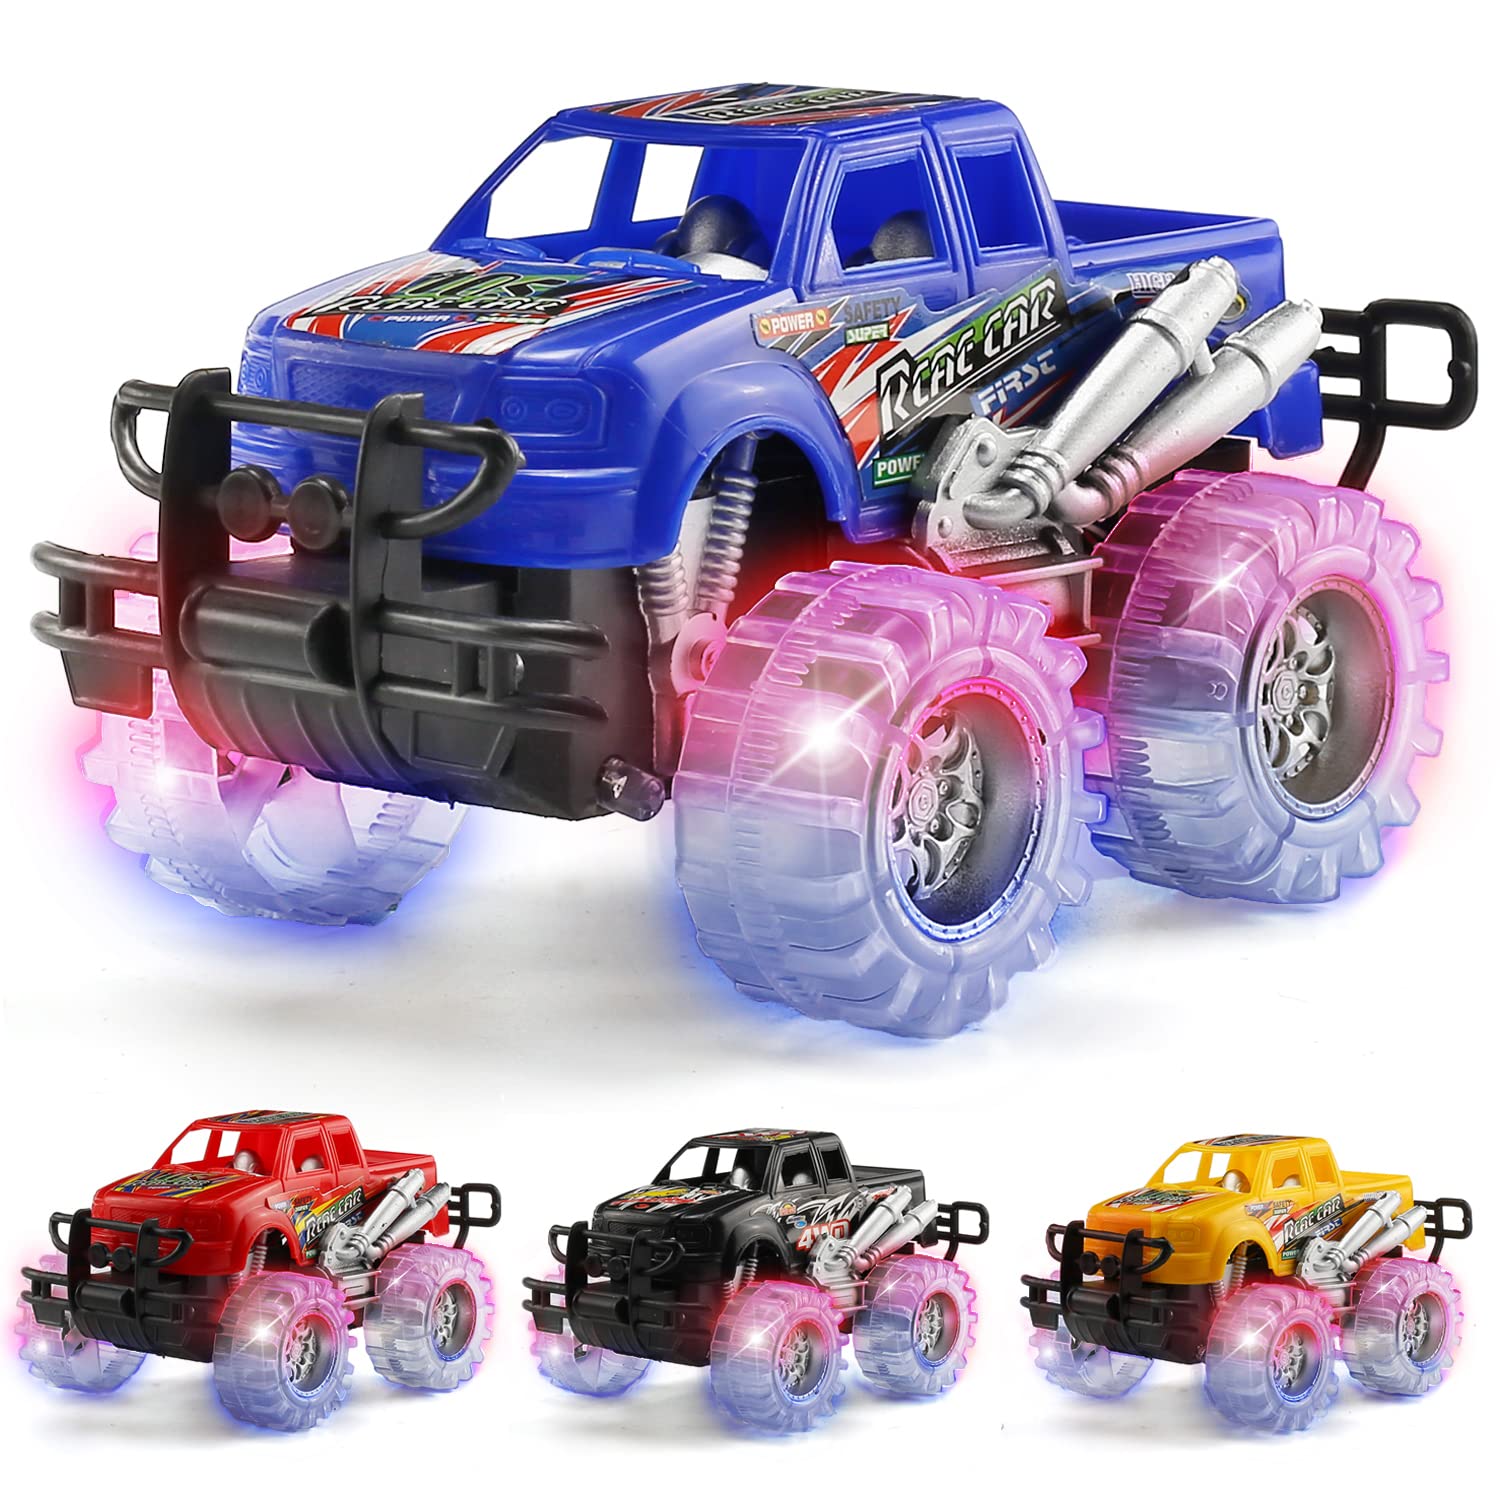 MAPIXO 4 Pack 4 colors Light Up Monster Truck Set with Flashing LED Wheels, Best gift for Boy and girl Age 3+ Years Old Push n go car,